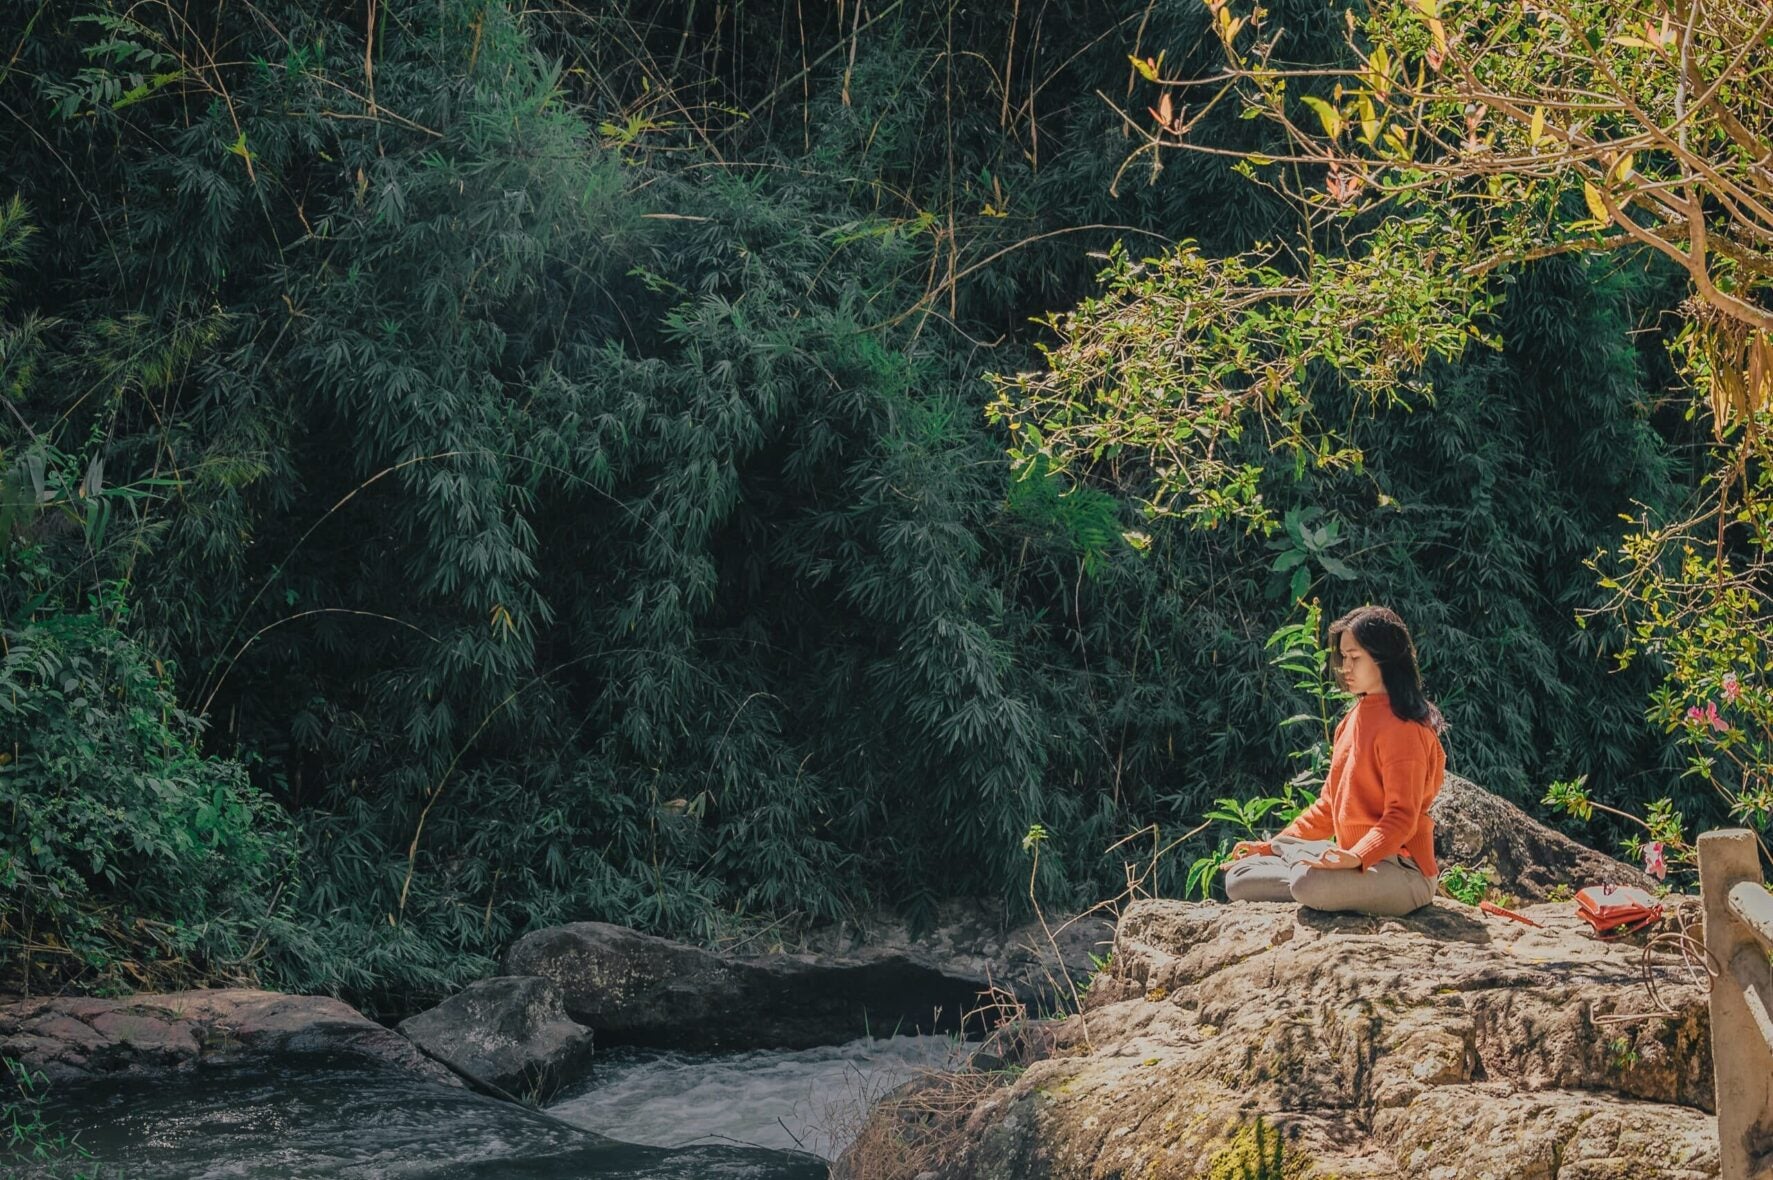 Find your inner peace with meditation